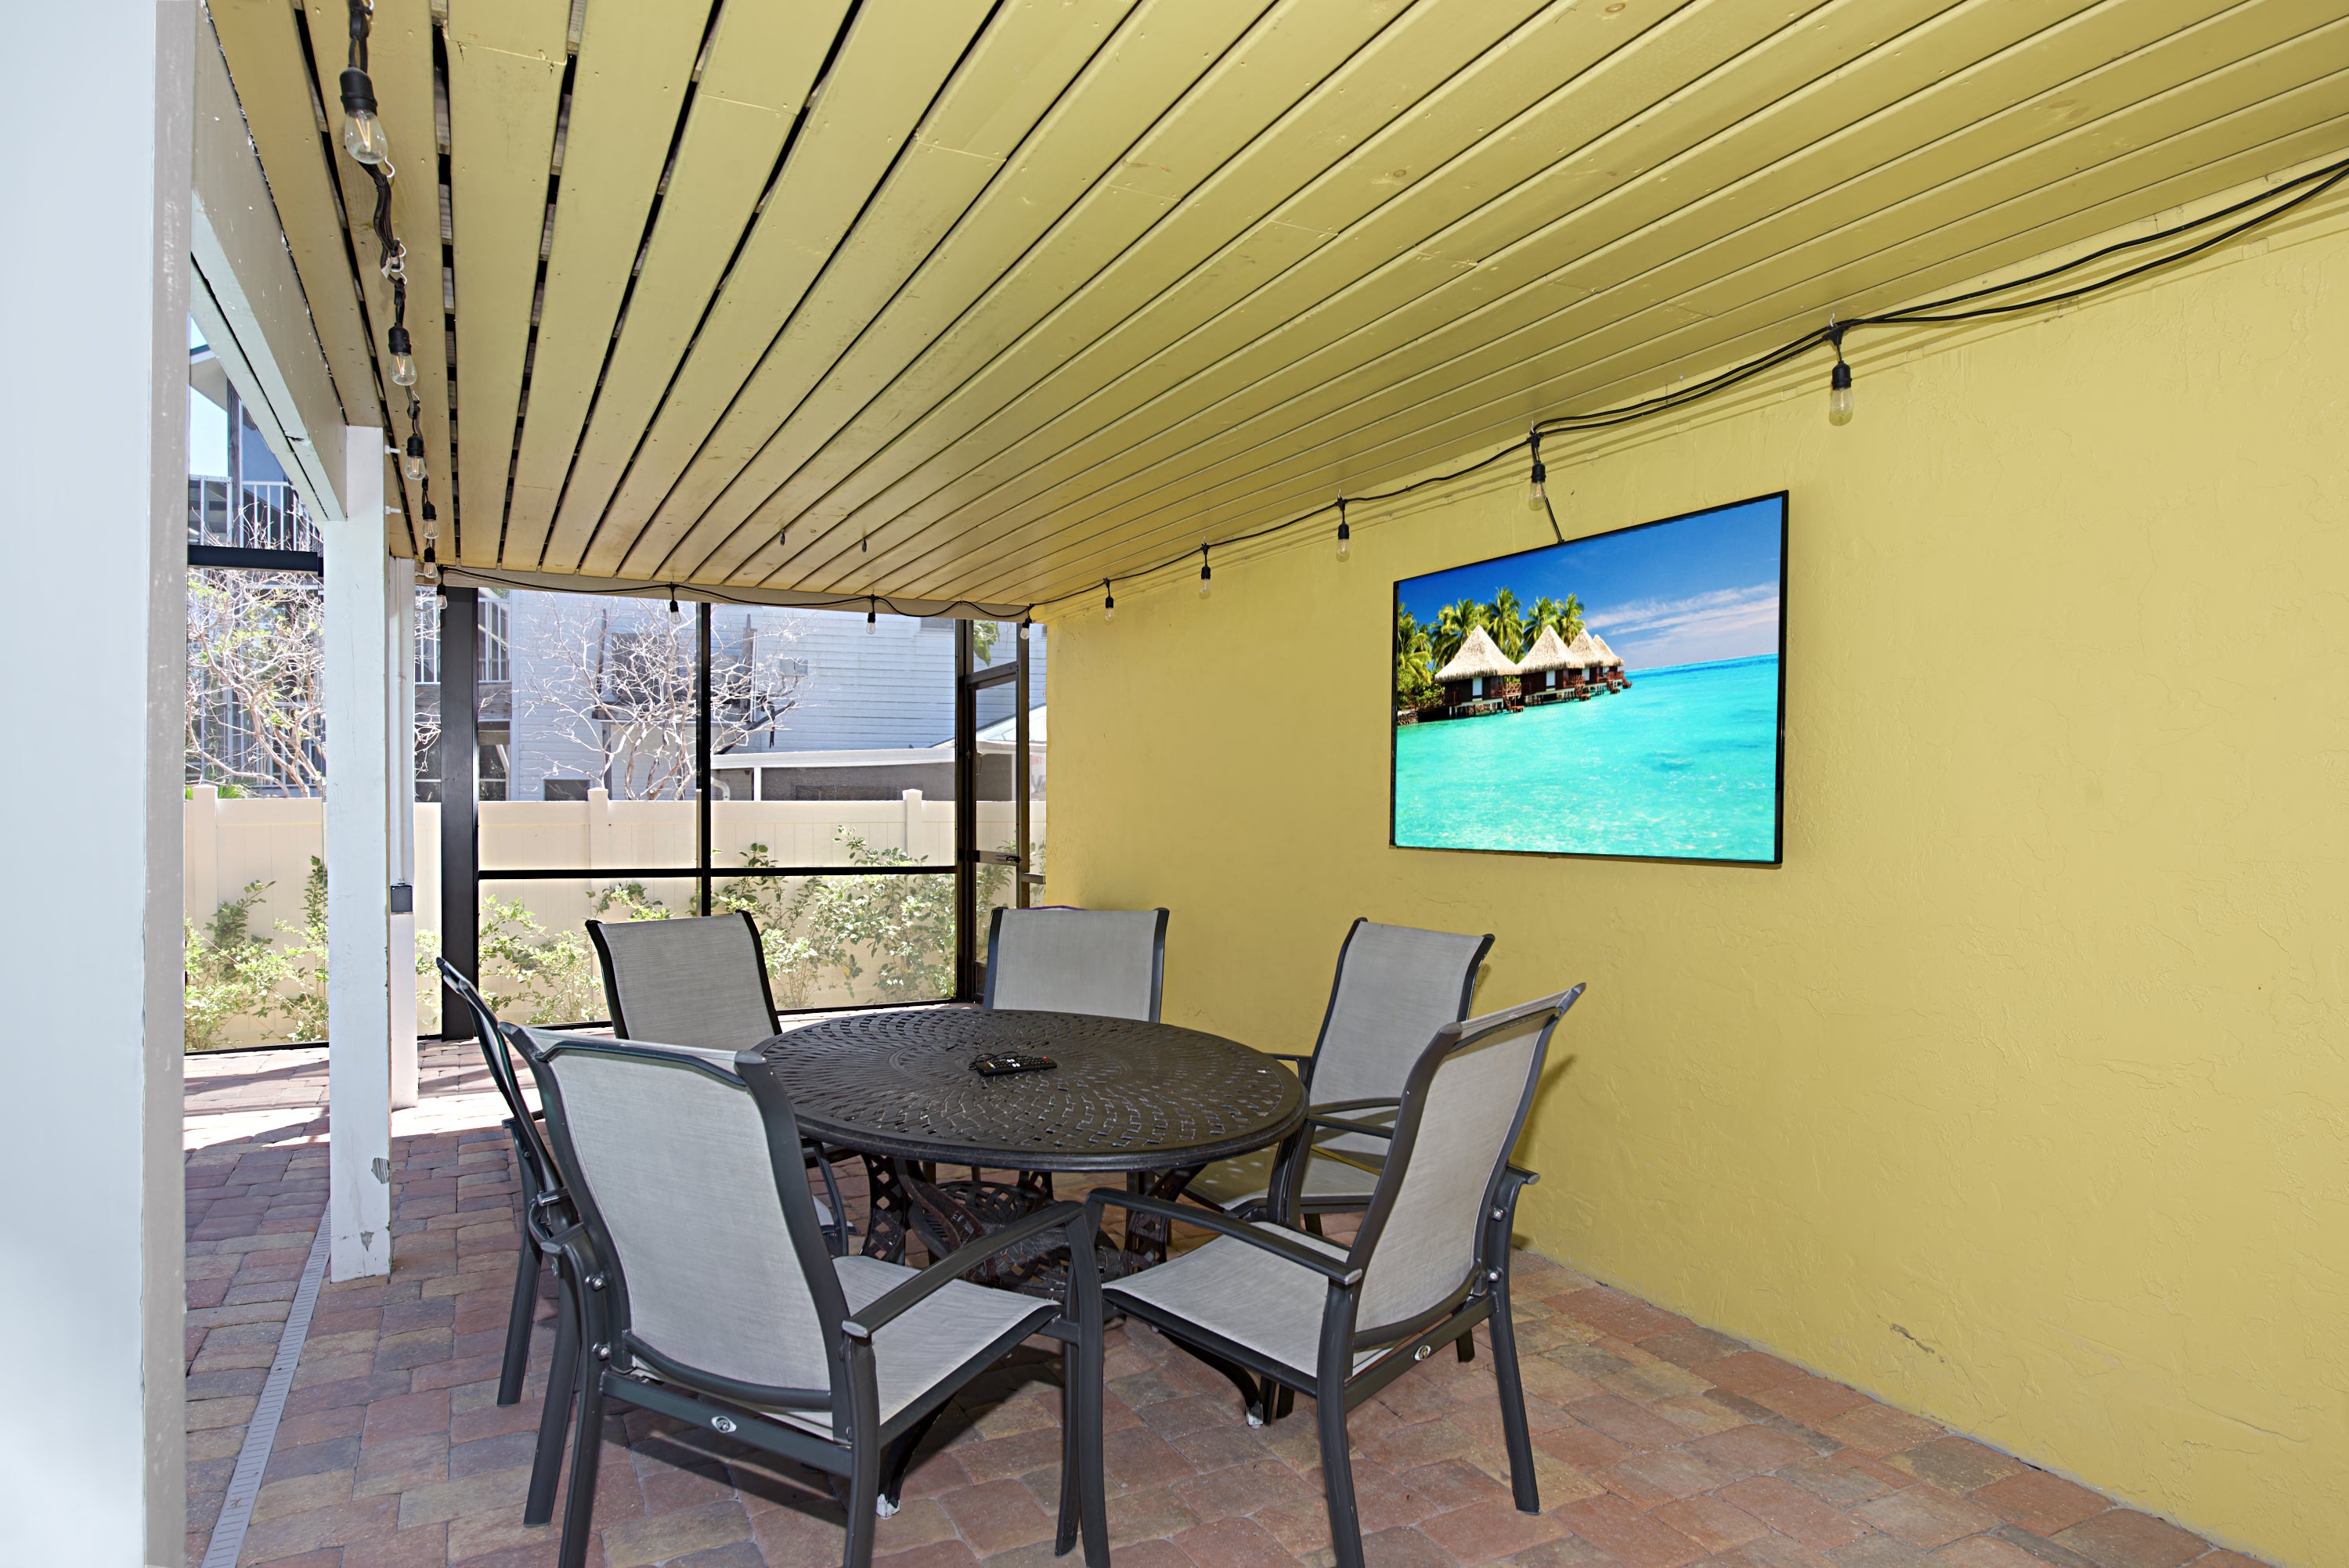 New Outdoor TV on Patio